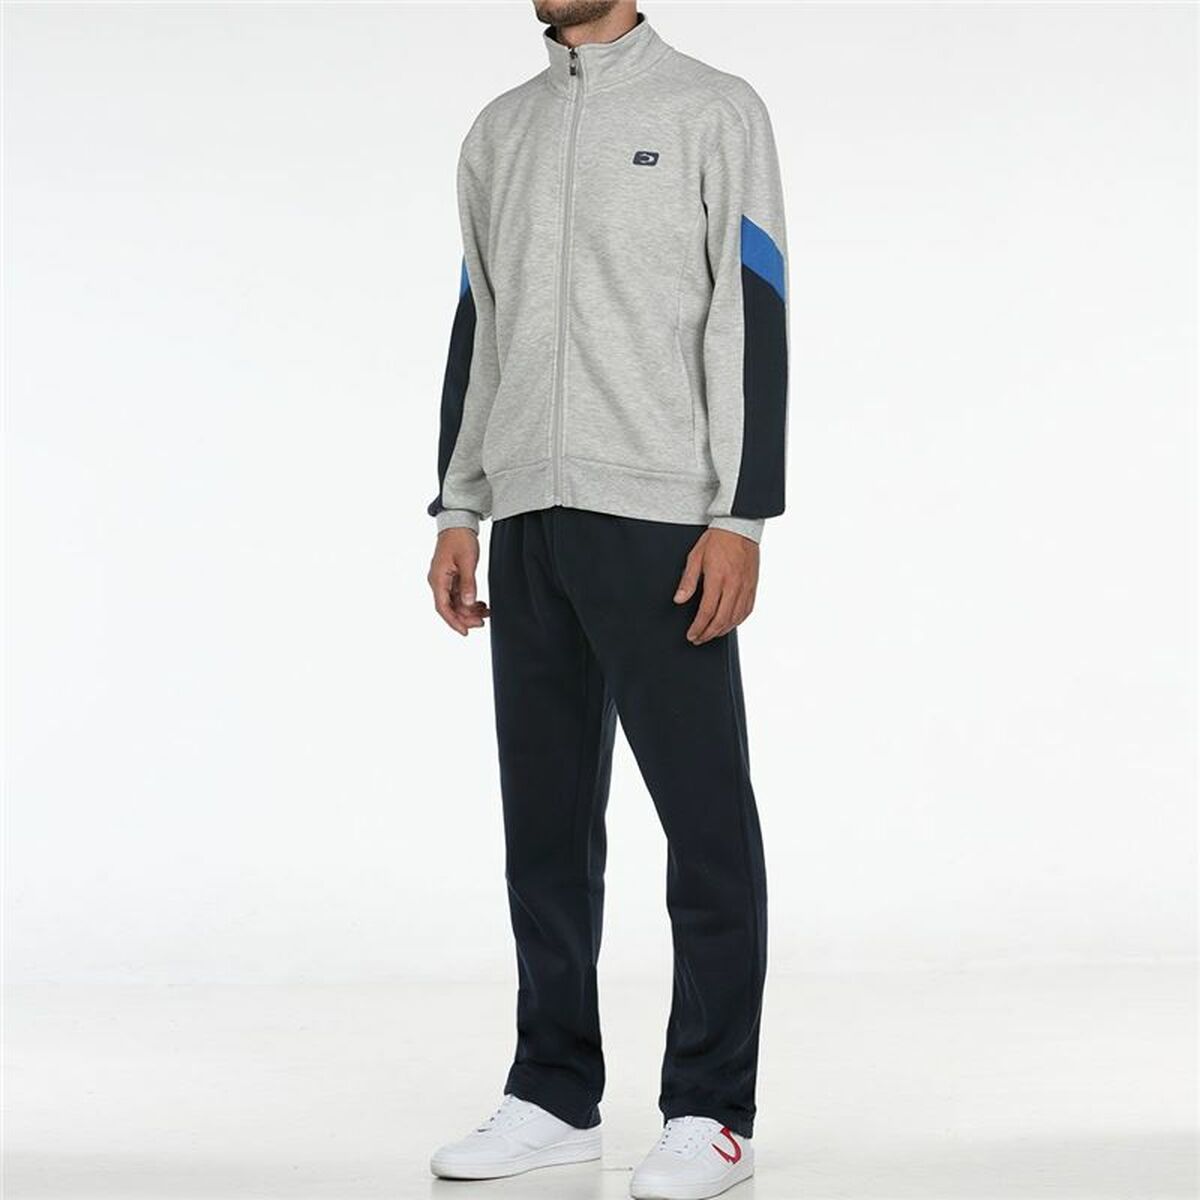 Tracksuit for Adults John Smith Kirie Grey